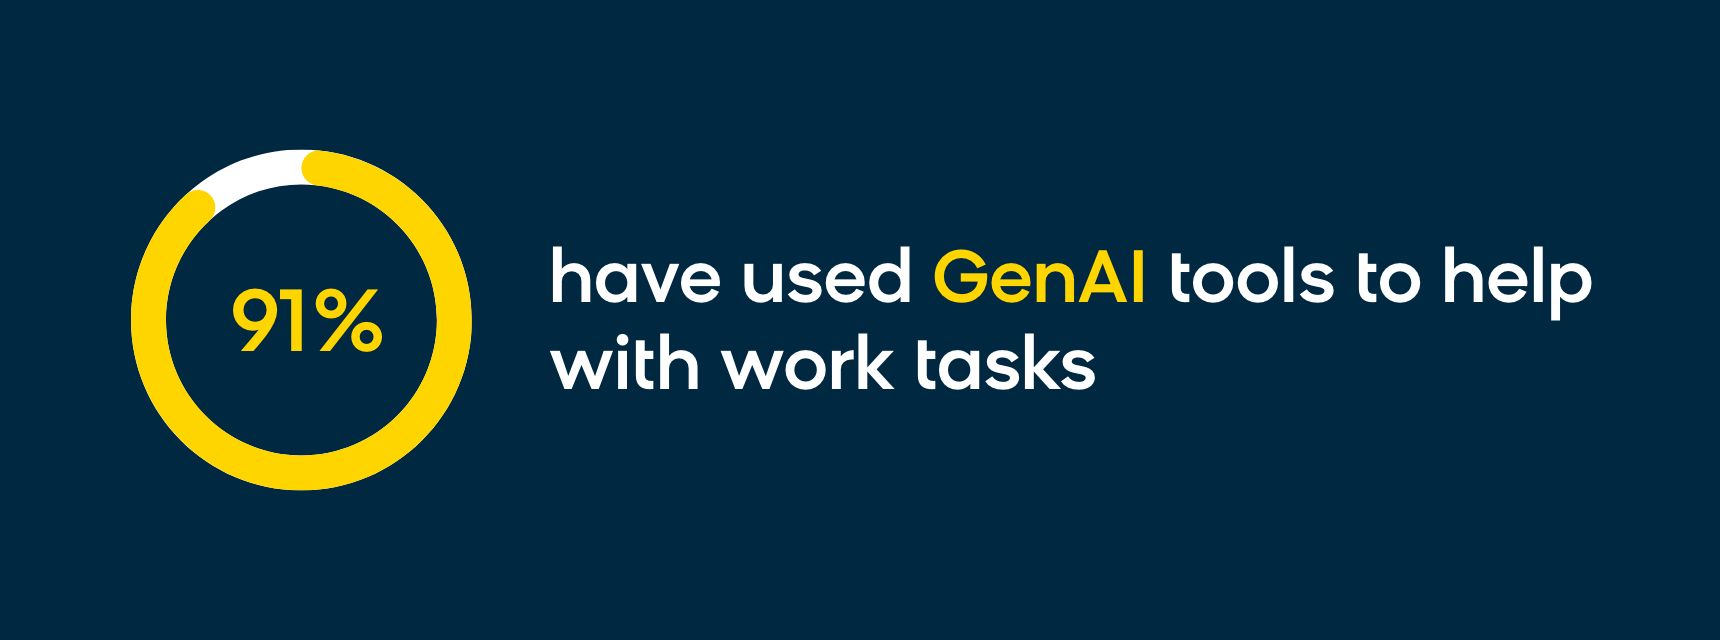 91% have used GenAI tools to help with work tasks